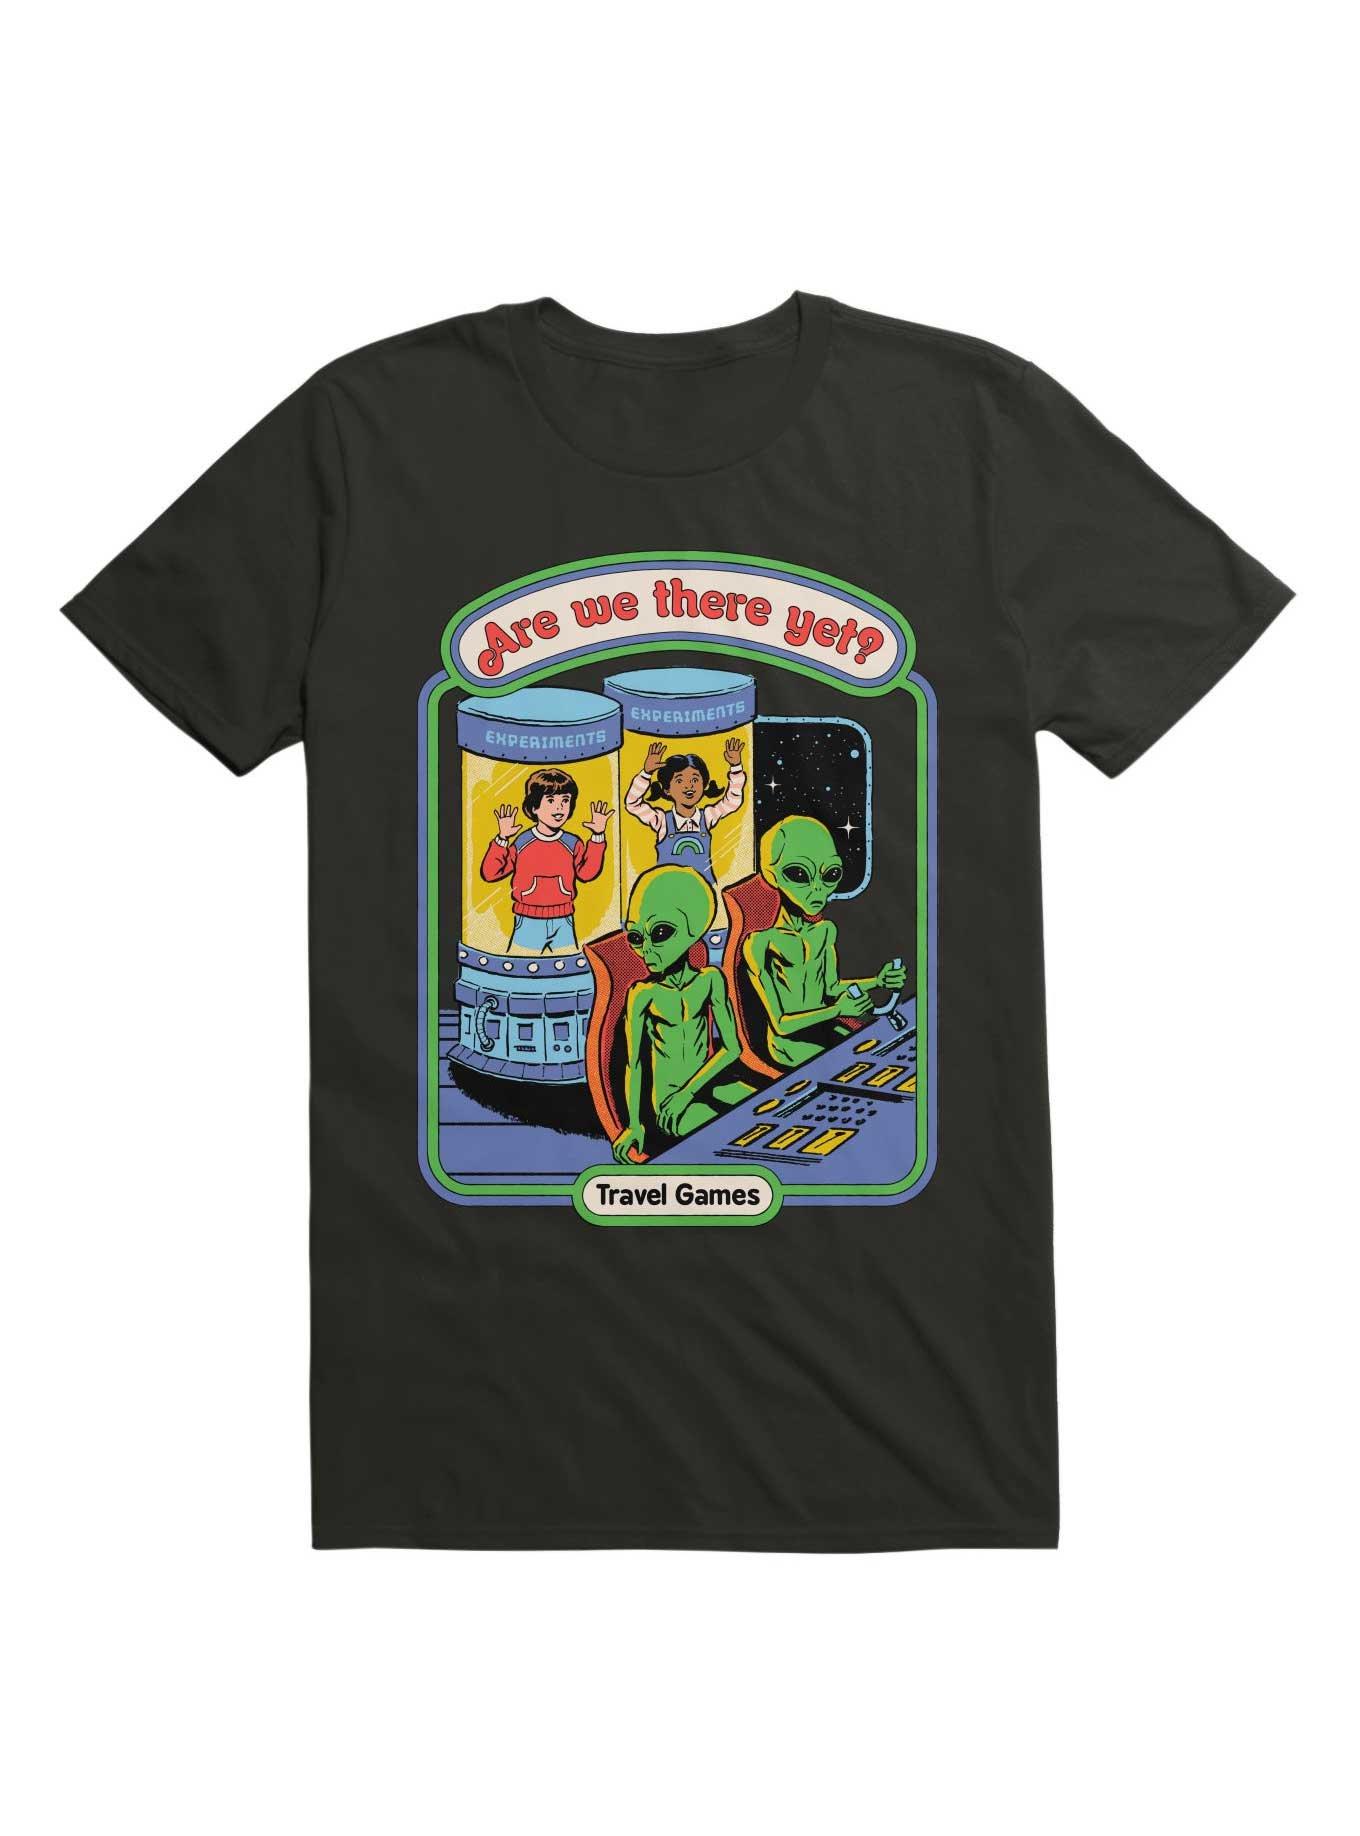 Are We There Yet? T-Shirt By Steven Rhodes